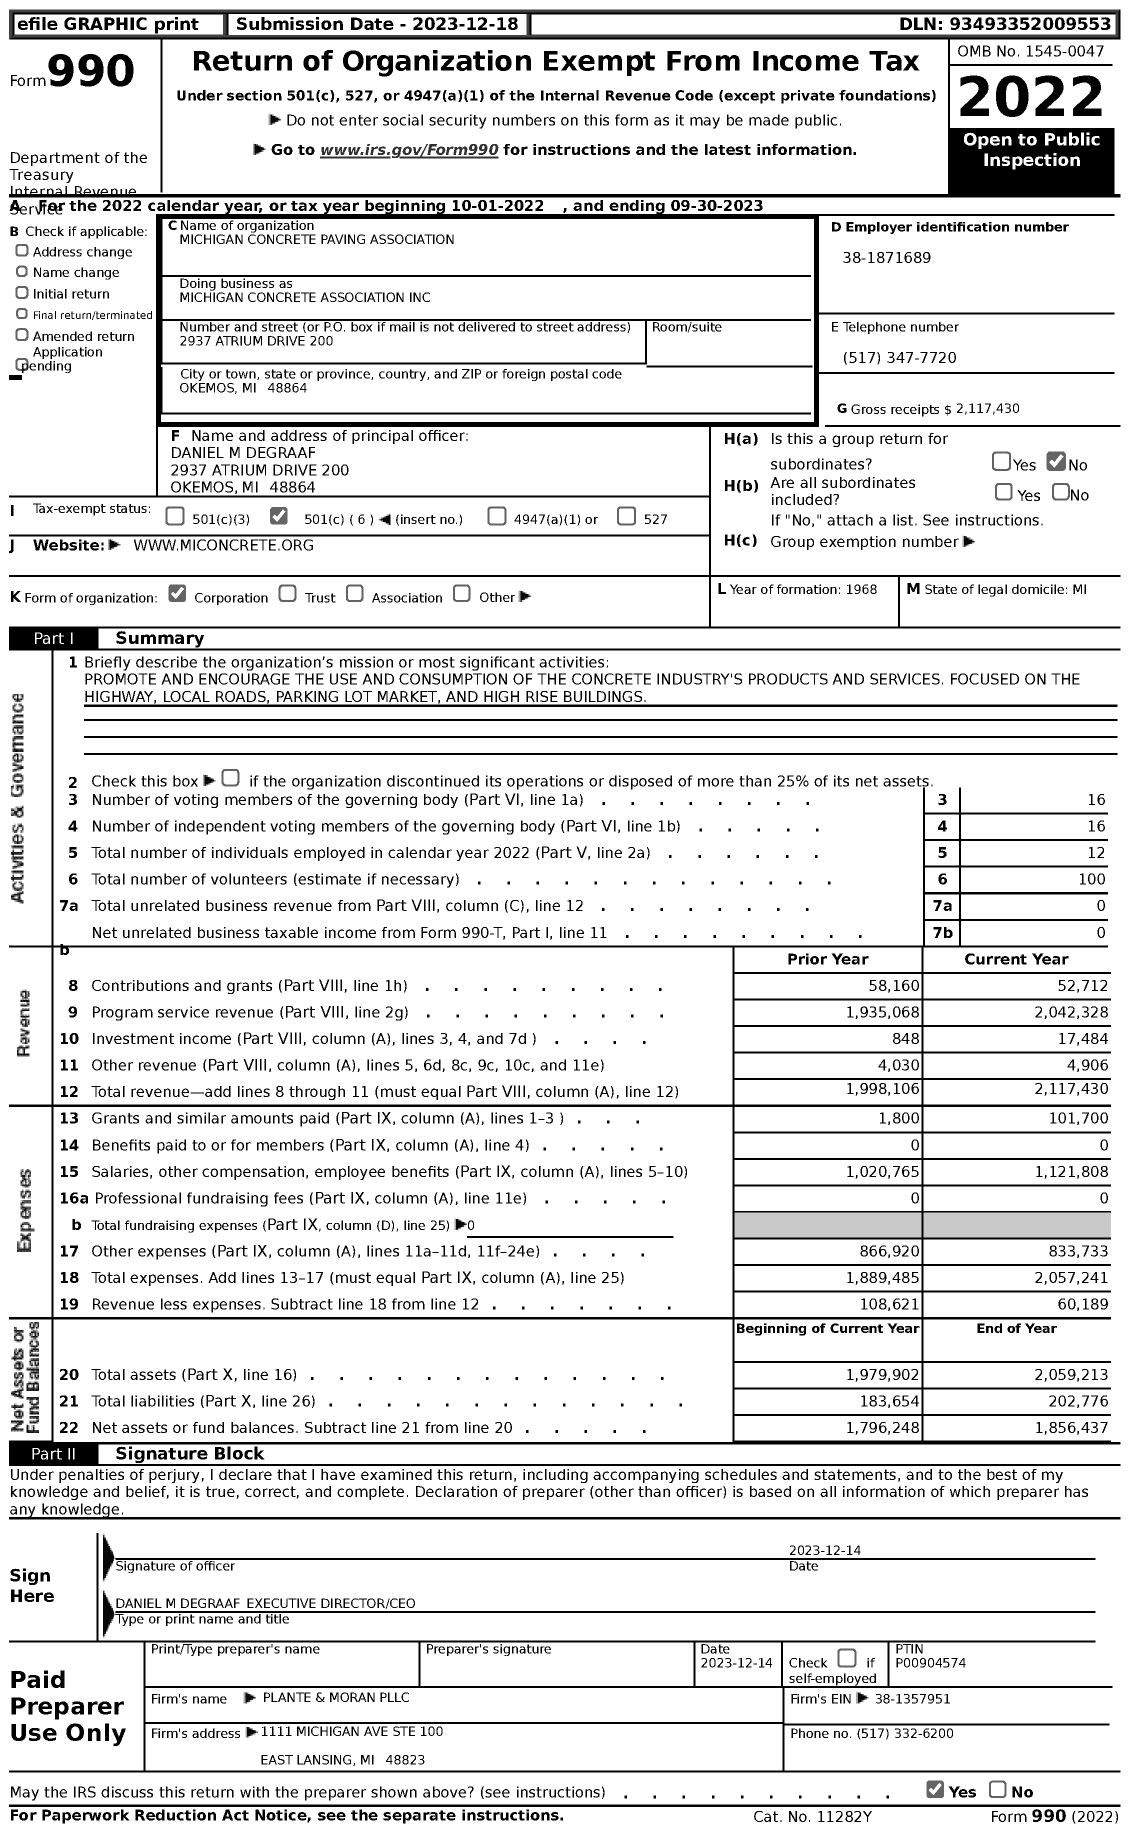 Image of first page of 2022 Form 990 for Michigan Concrete Association (MCA)